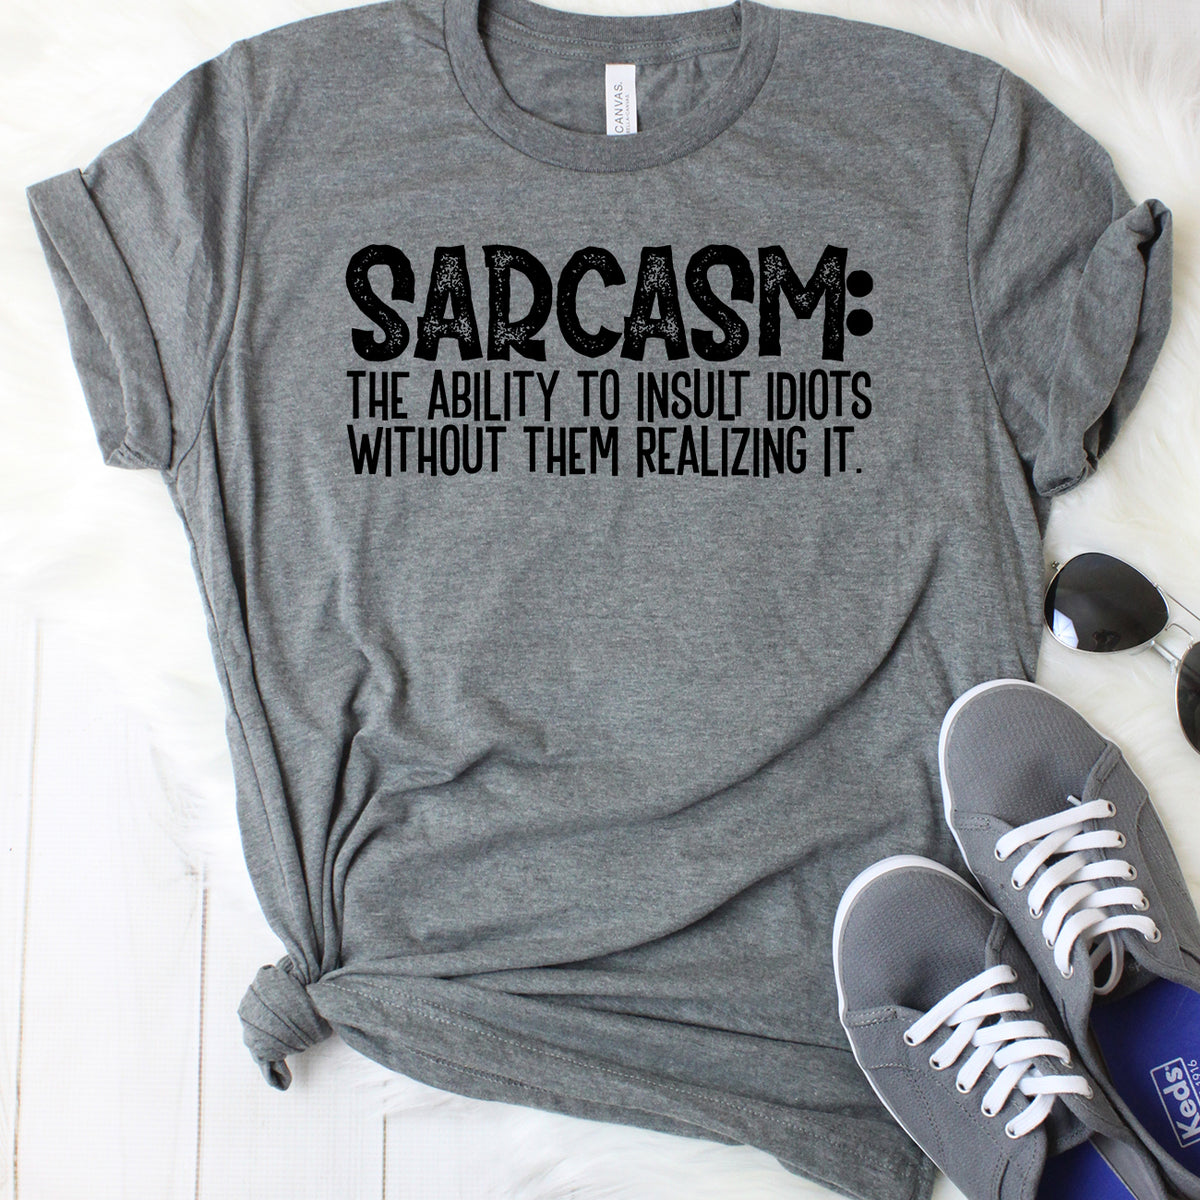 Sarcasm: The Ability To Insult Idiots Without Them Realizing It Dark Grey T-Shirt